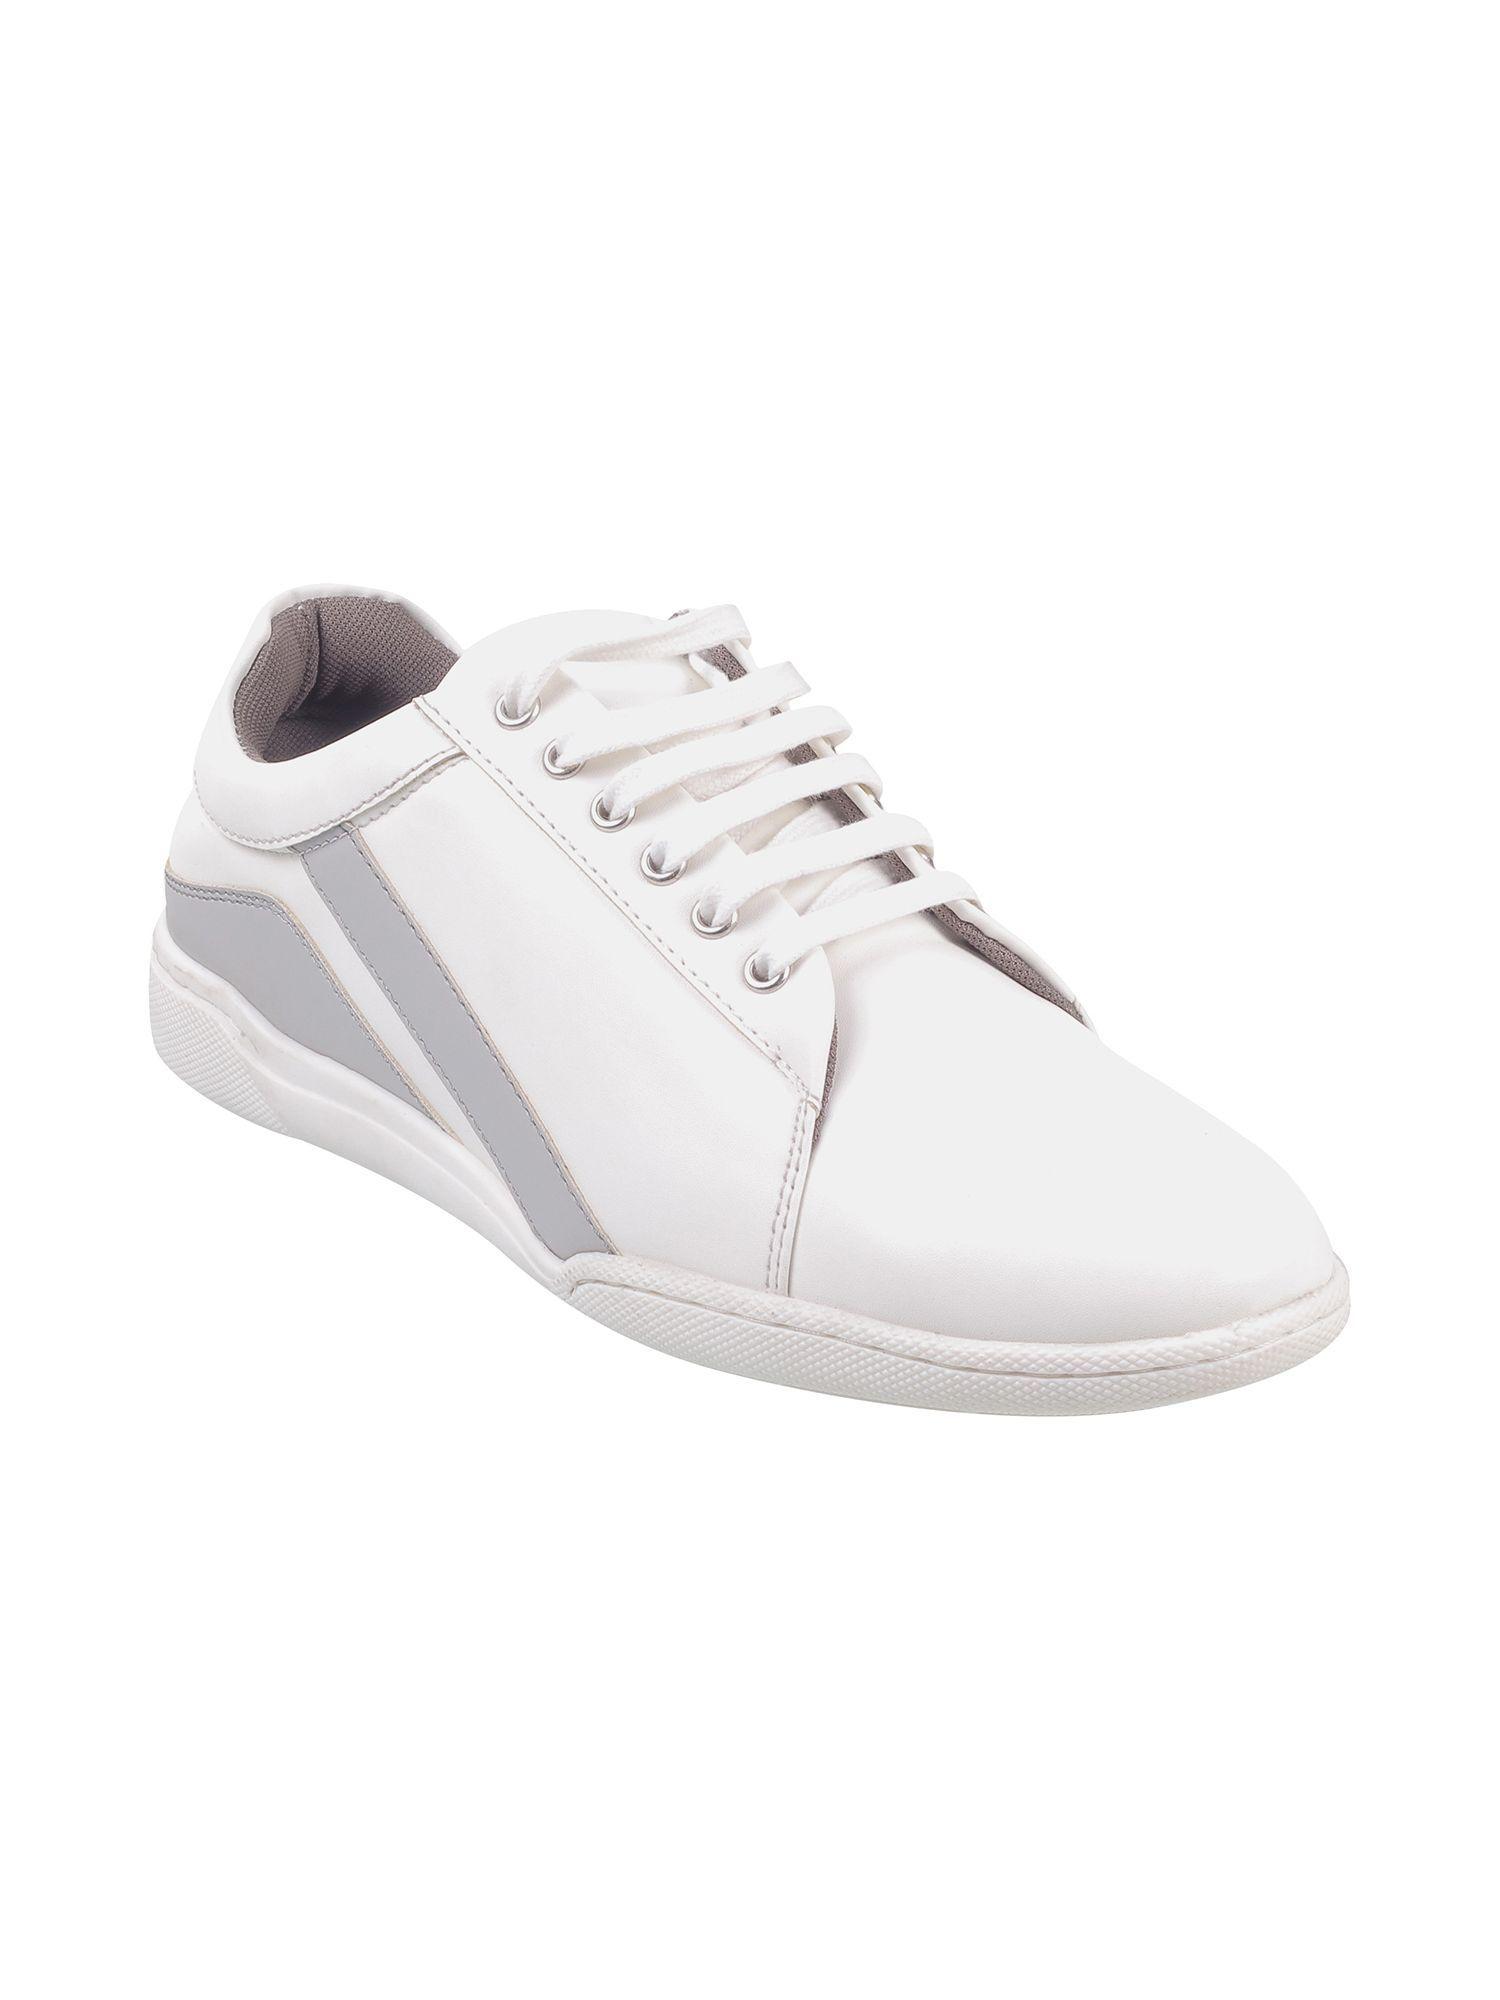 white-solid-lace-ups-for-men